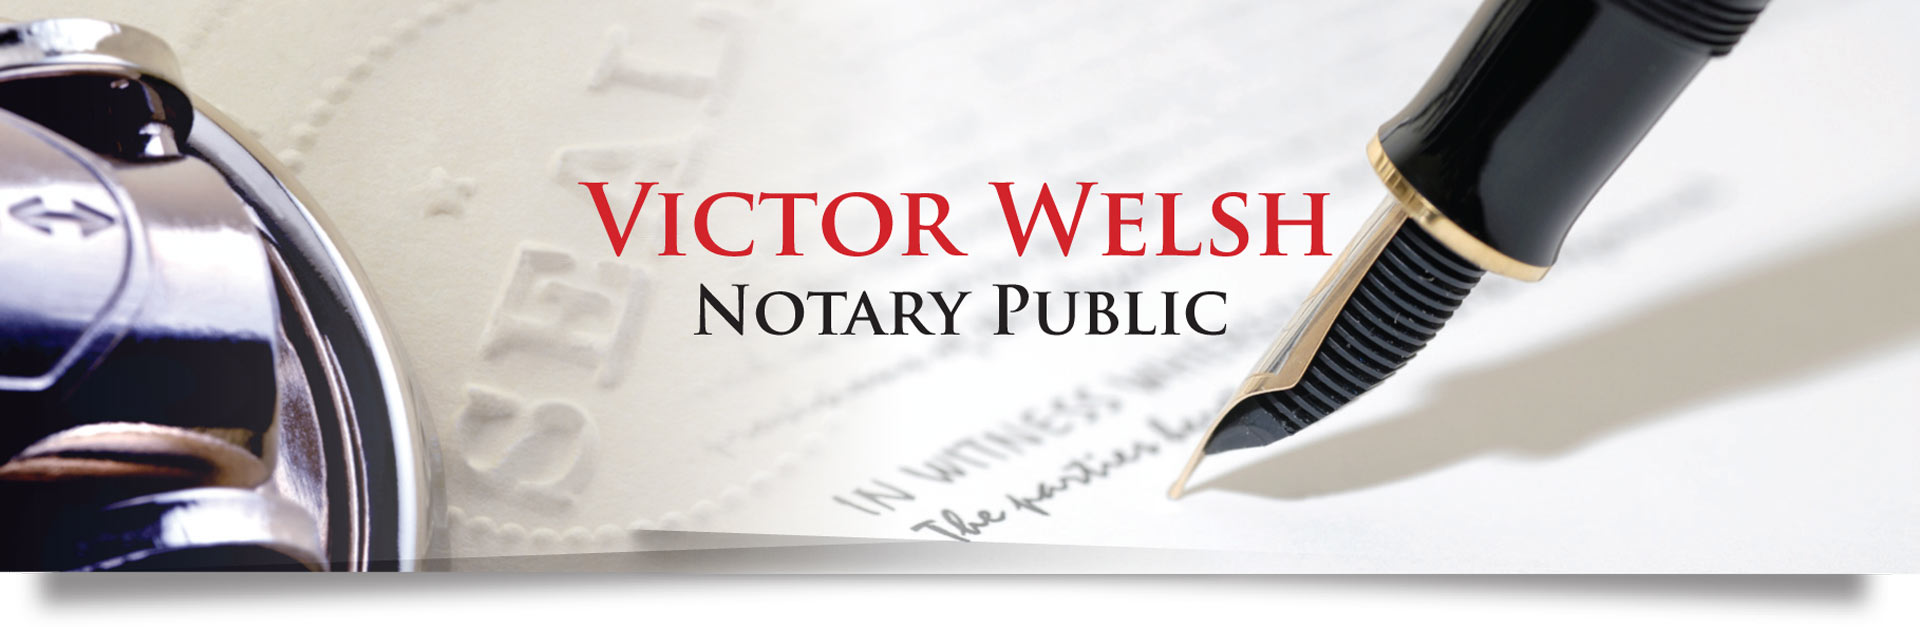 notary public Liverpool